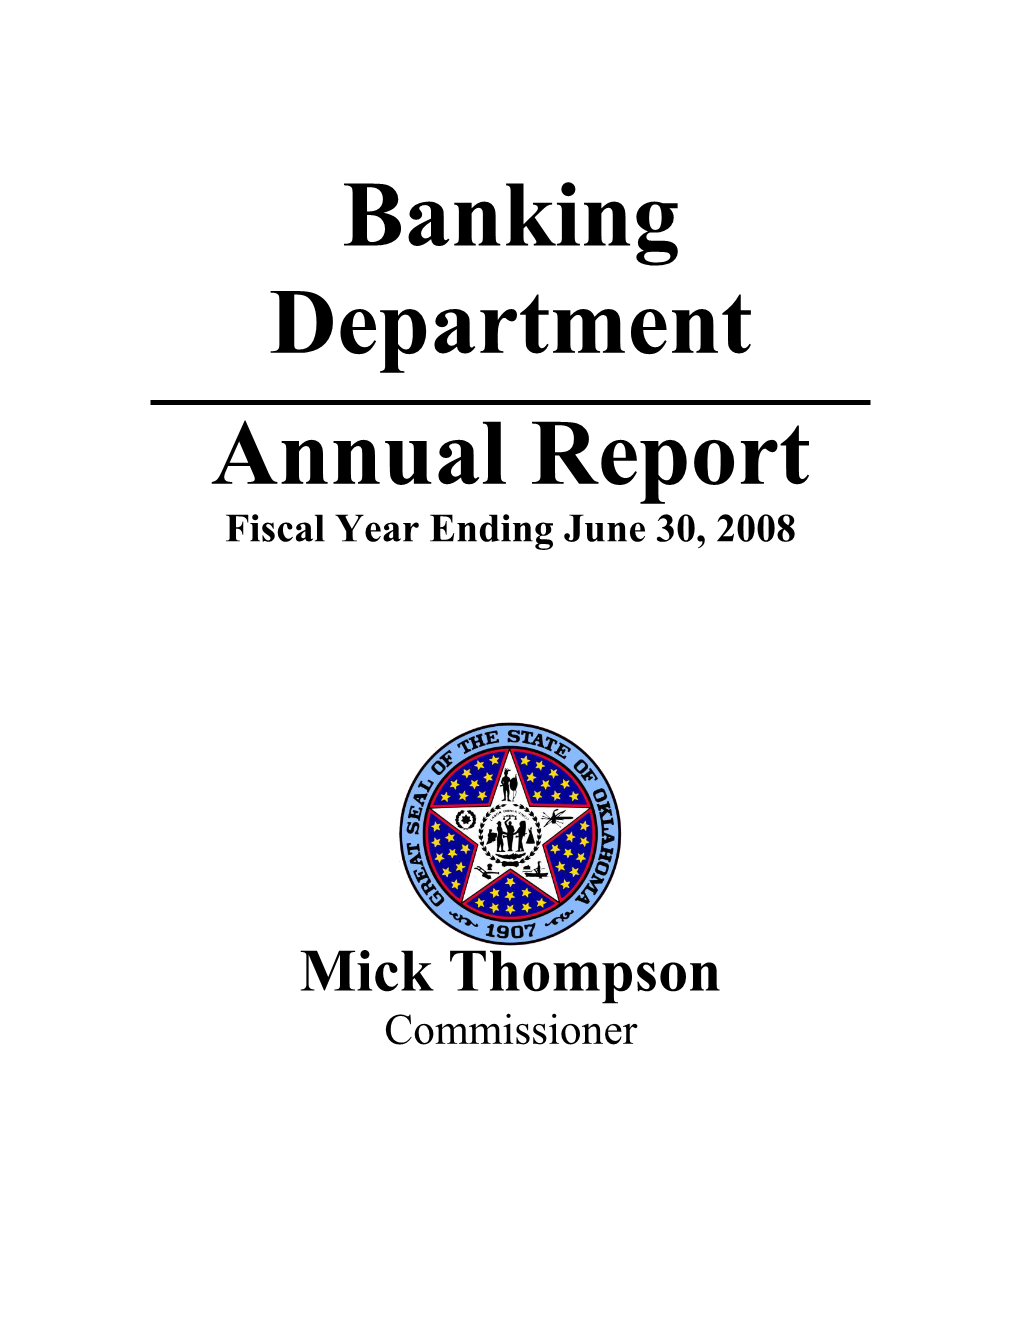 Banking Department Annual Report